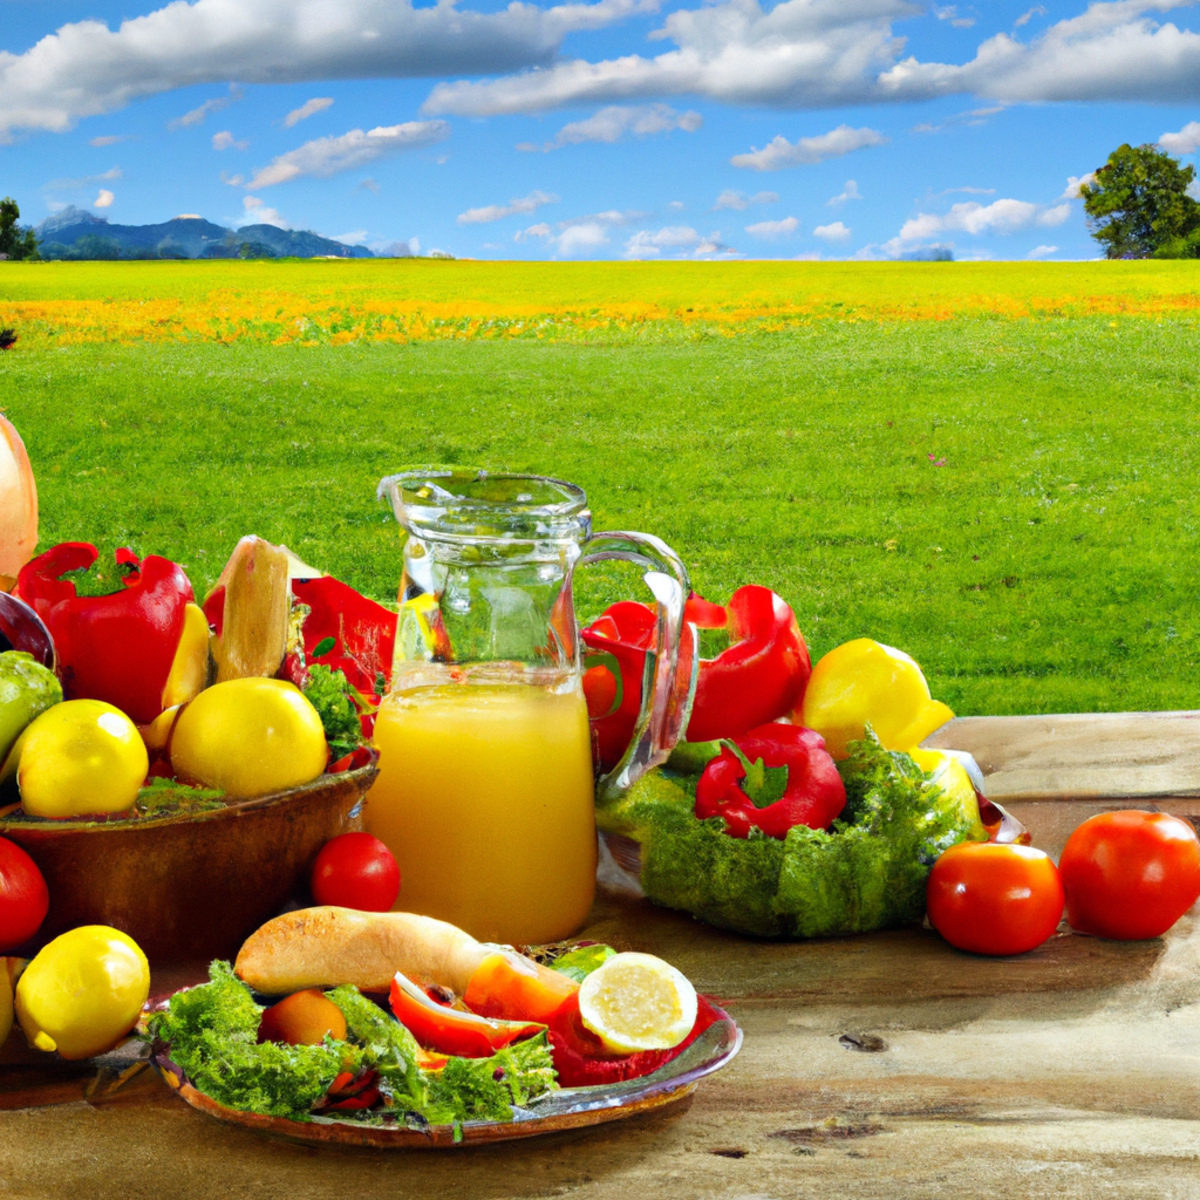 The photo captures a rustic wooden table adorned with an array of colorful fruits and vegetables, including plump tomatoes, crisp lettuce, and vibrant bell peppers. A woven basket filled with freshly picked apples sits in the center, while a pitcher of homemade lemonade and a loaf of crusty bread complete the scene. In the background, a lush green field stretches out, hinting at the source of these delicious and nutritious foods. The image exudes a sense of wholesome goodness and highlights the benefits of choosing locally grown, organic produce.